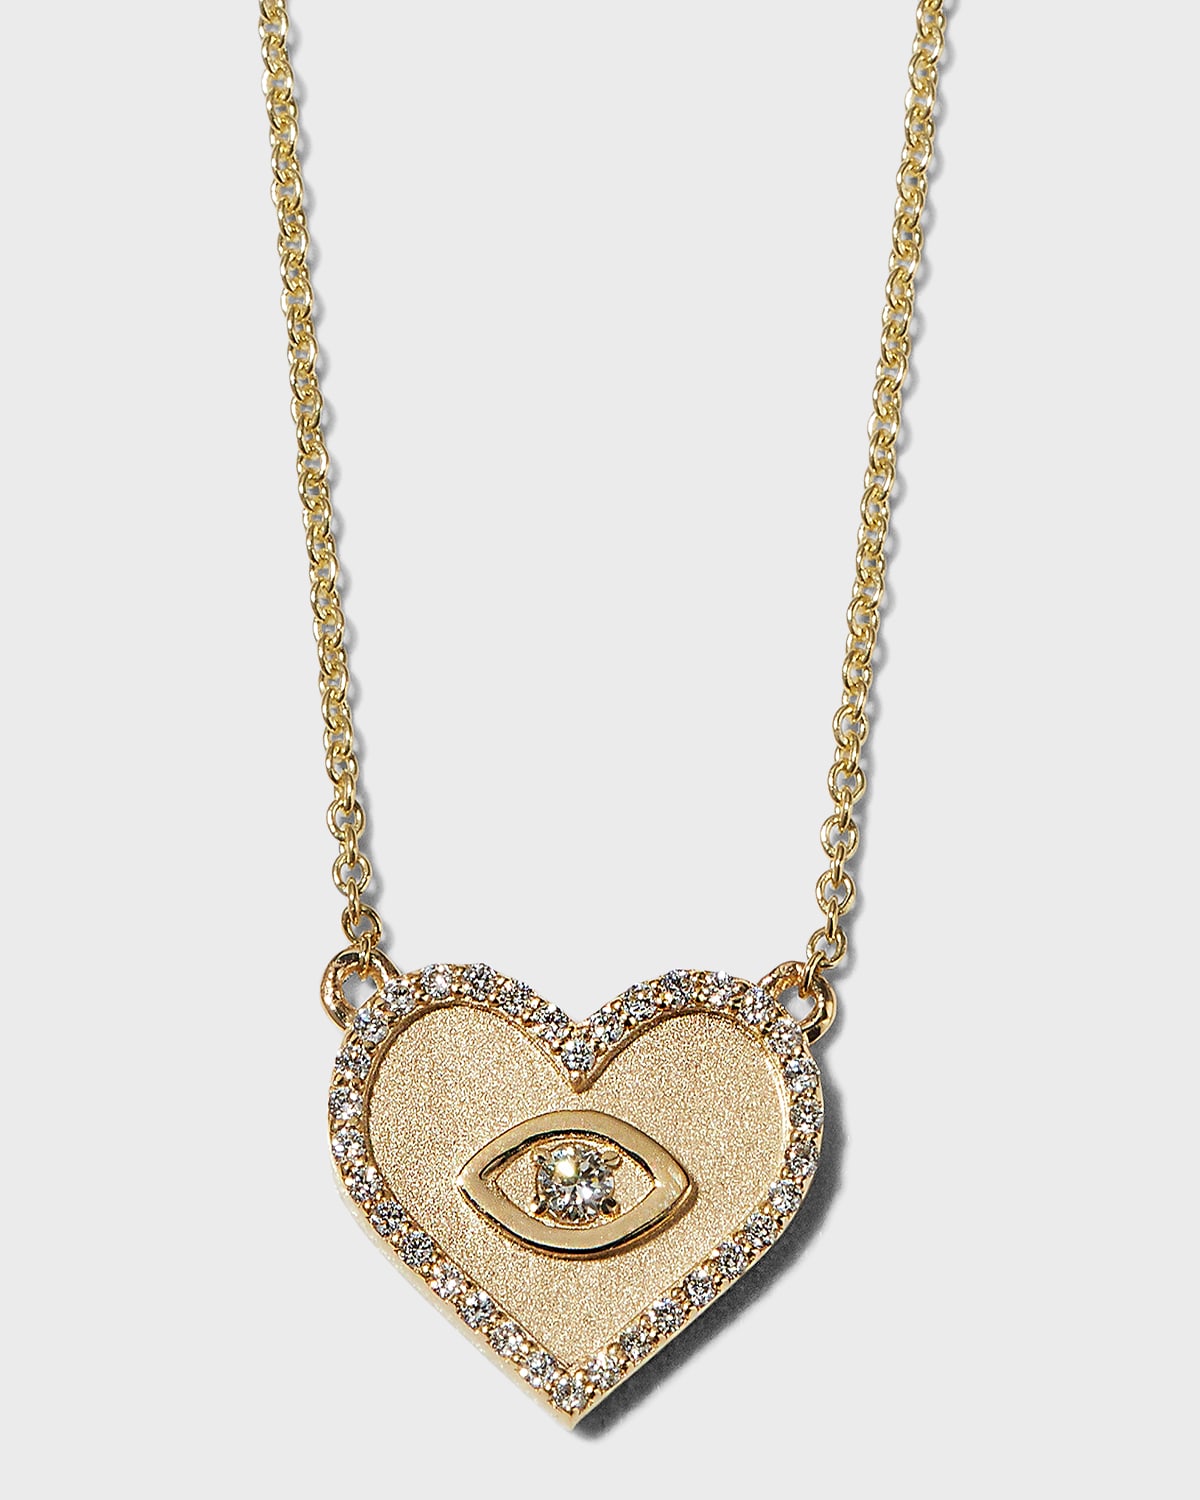 Sydney Evan Yellow Gold Small Heart Necklace With Marquise Eye